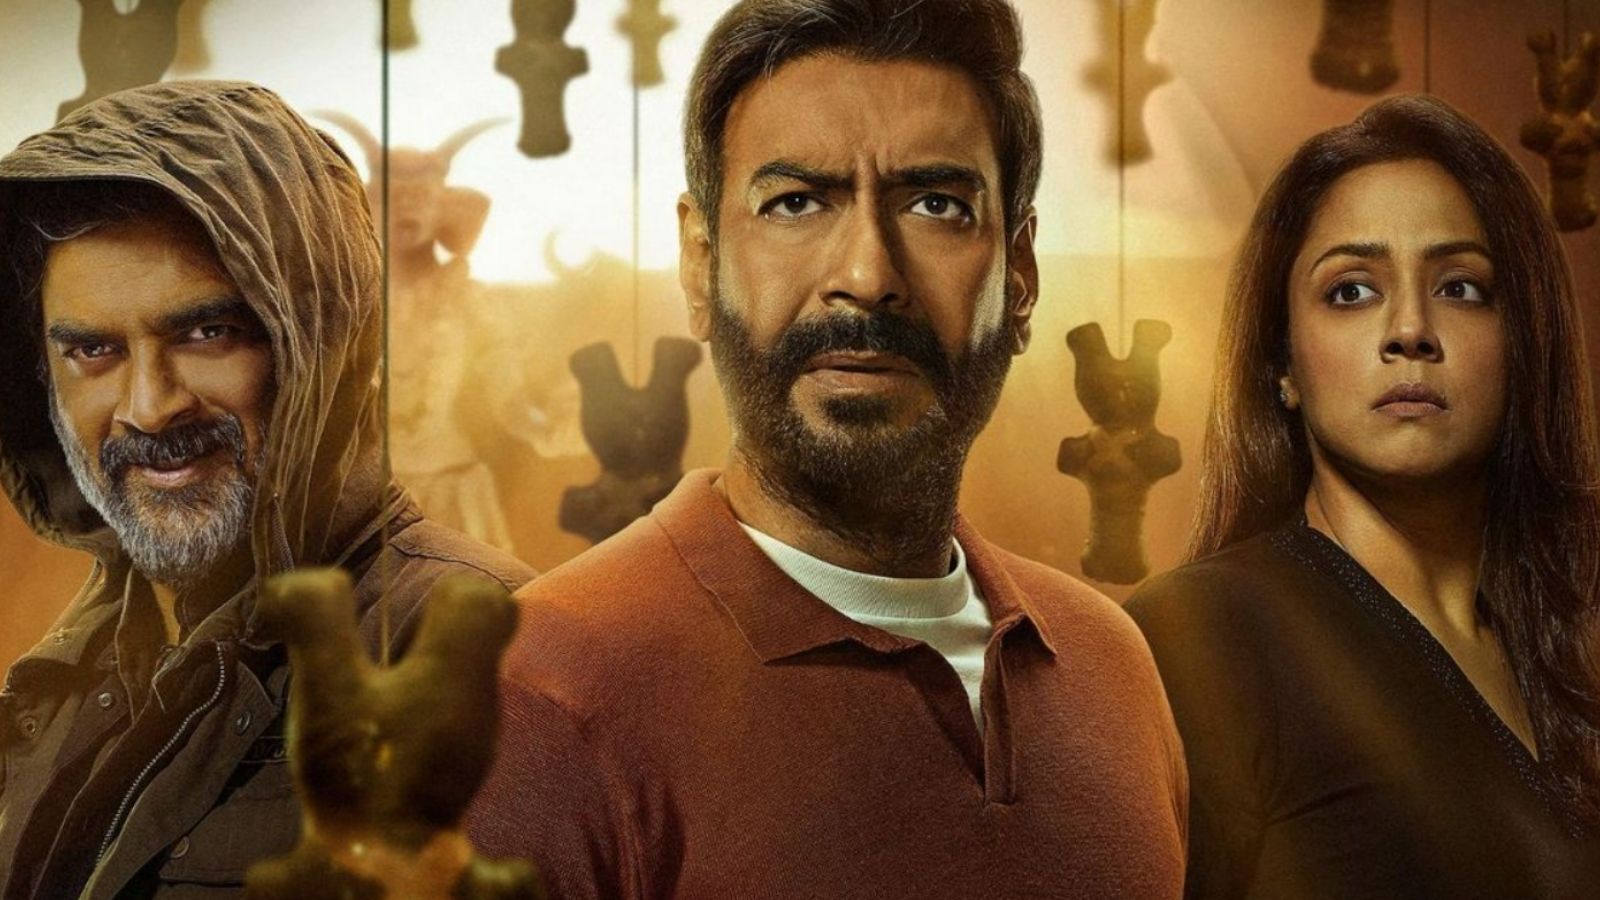 Shaitaan box office collection day 1: Ajay Devgn's horror movie challenges Drishyam 2's opening with Rs 15.20 crore debut | Bollywood News - The Indian Express